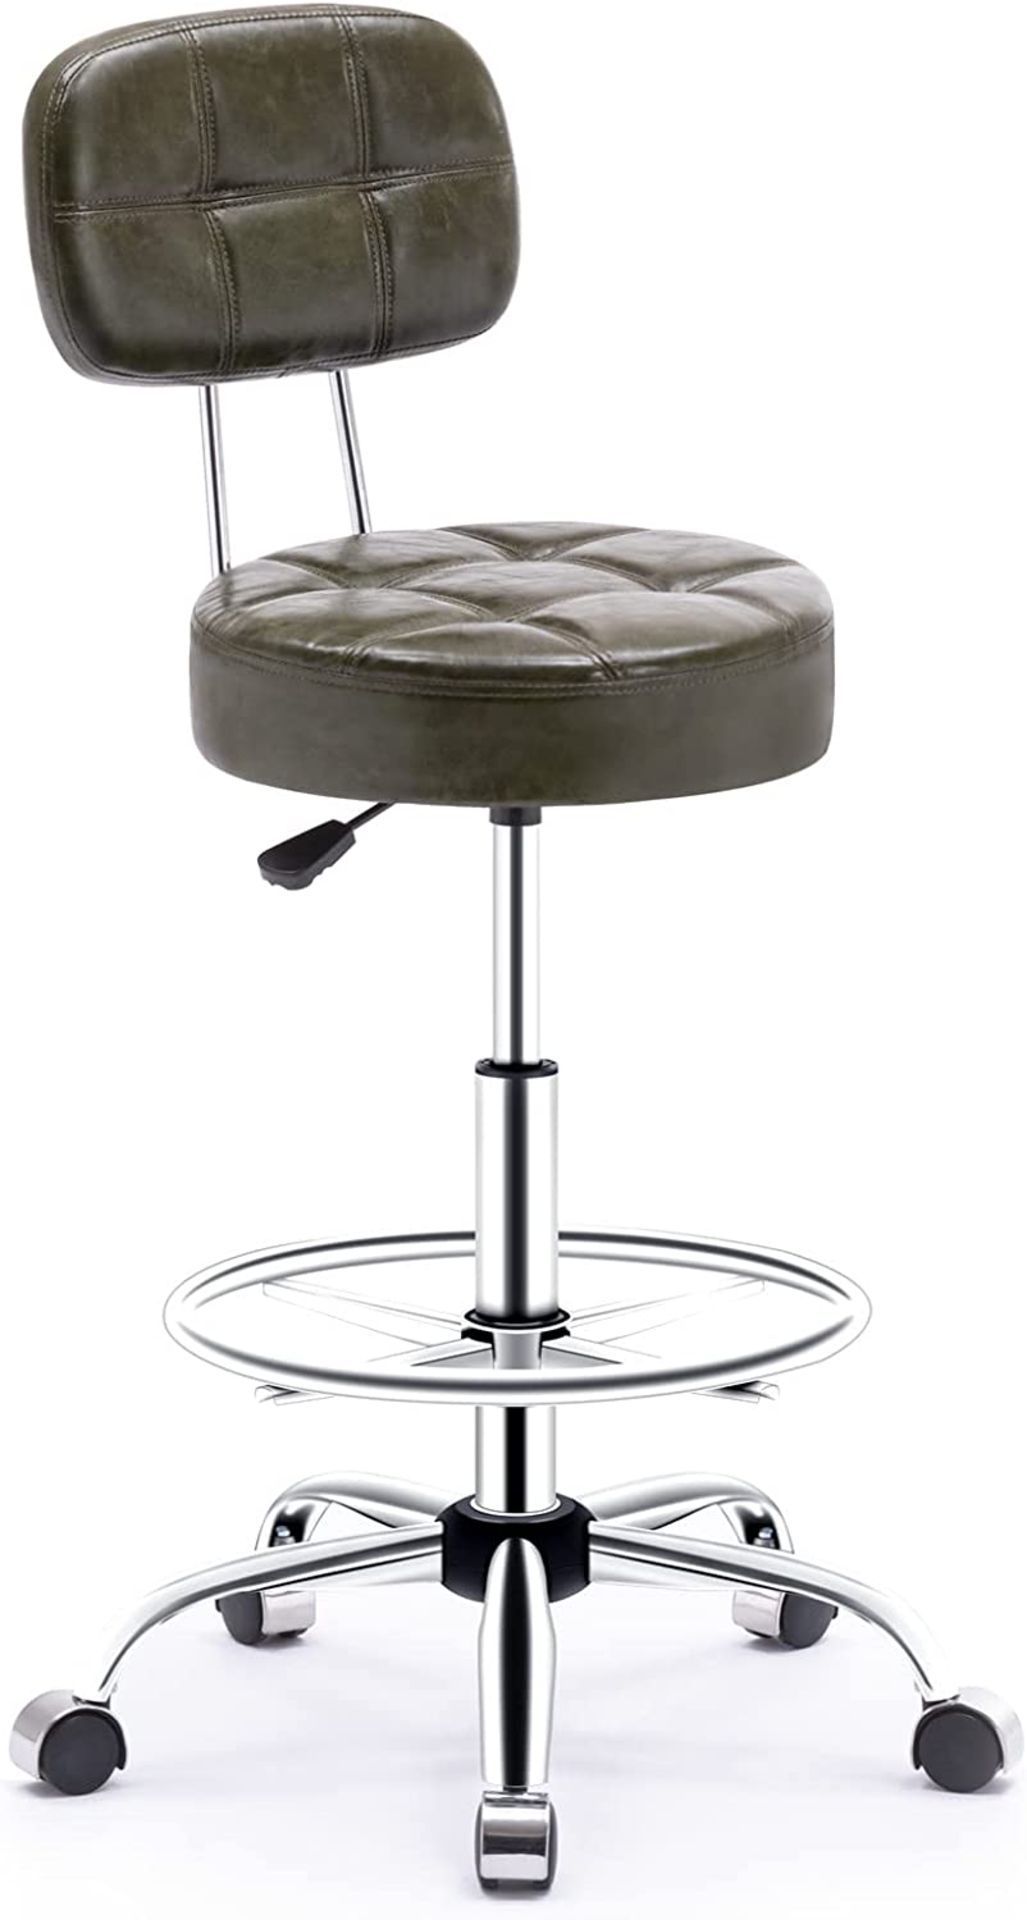 NEW Rolling stool with High Backrest and Adjustable Footrest, Leather Massage Stool Ergonomic